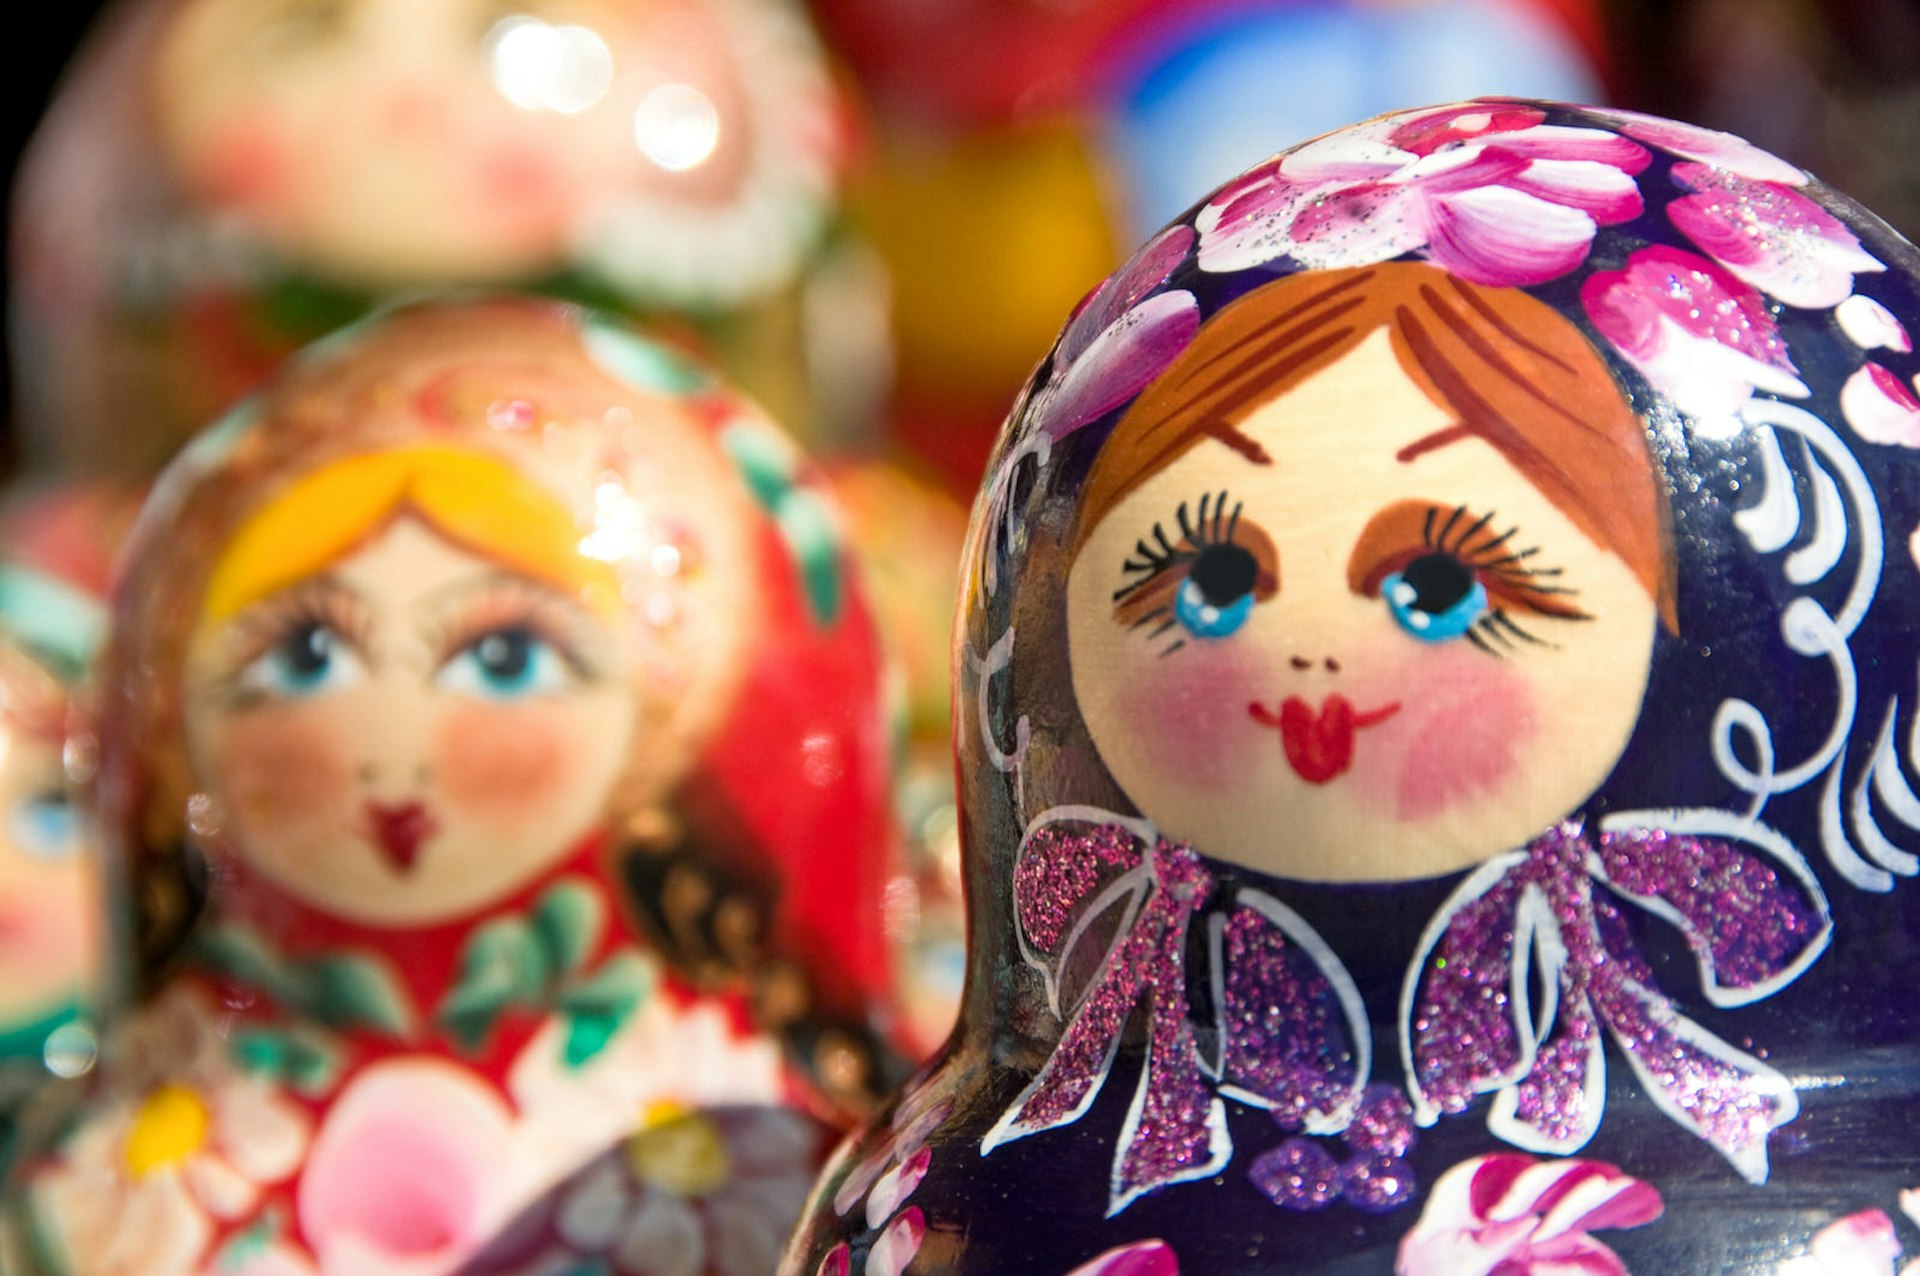 Hand-painted Russian dolls